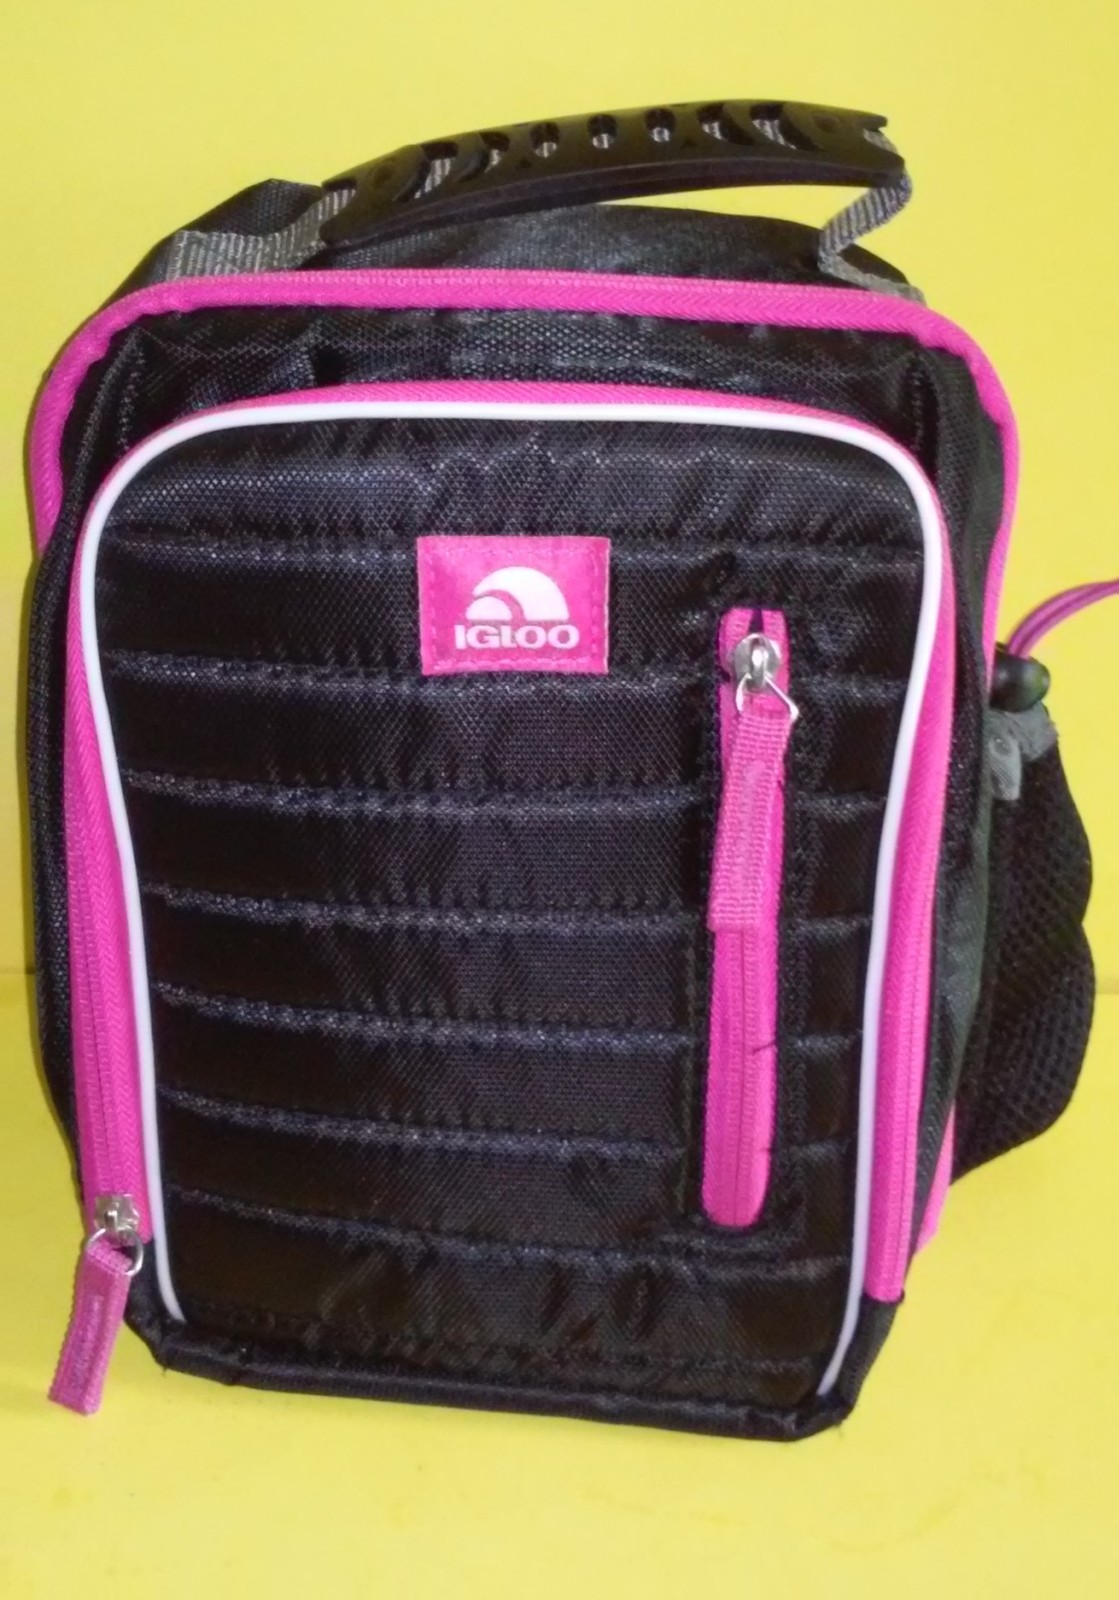 Igloo Pink & Black Lunch bag with storage - $12.99